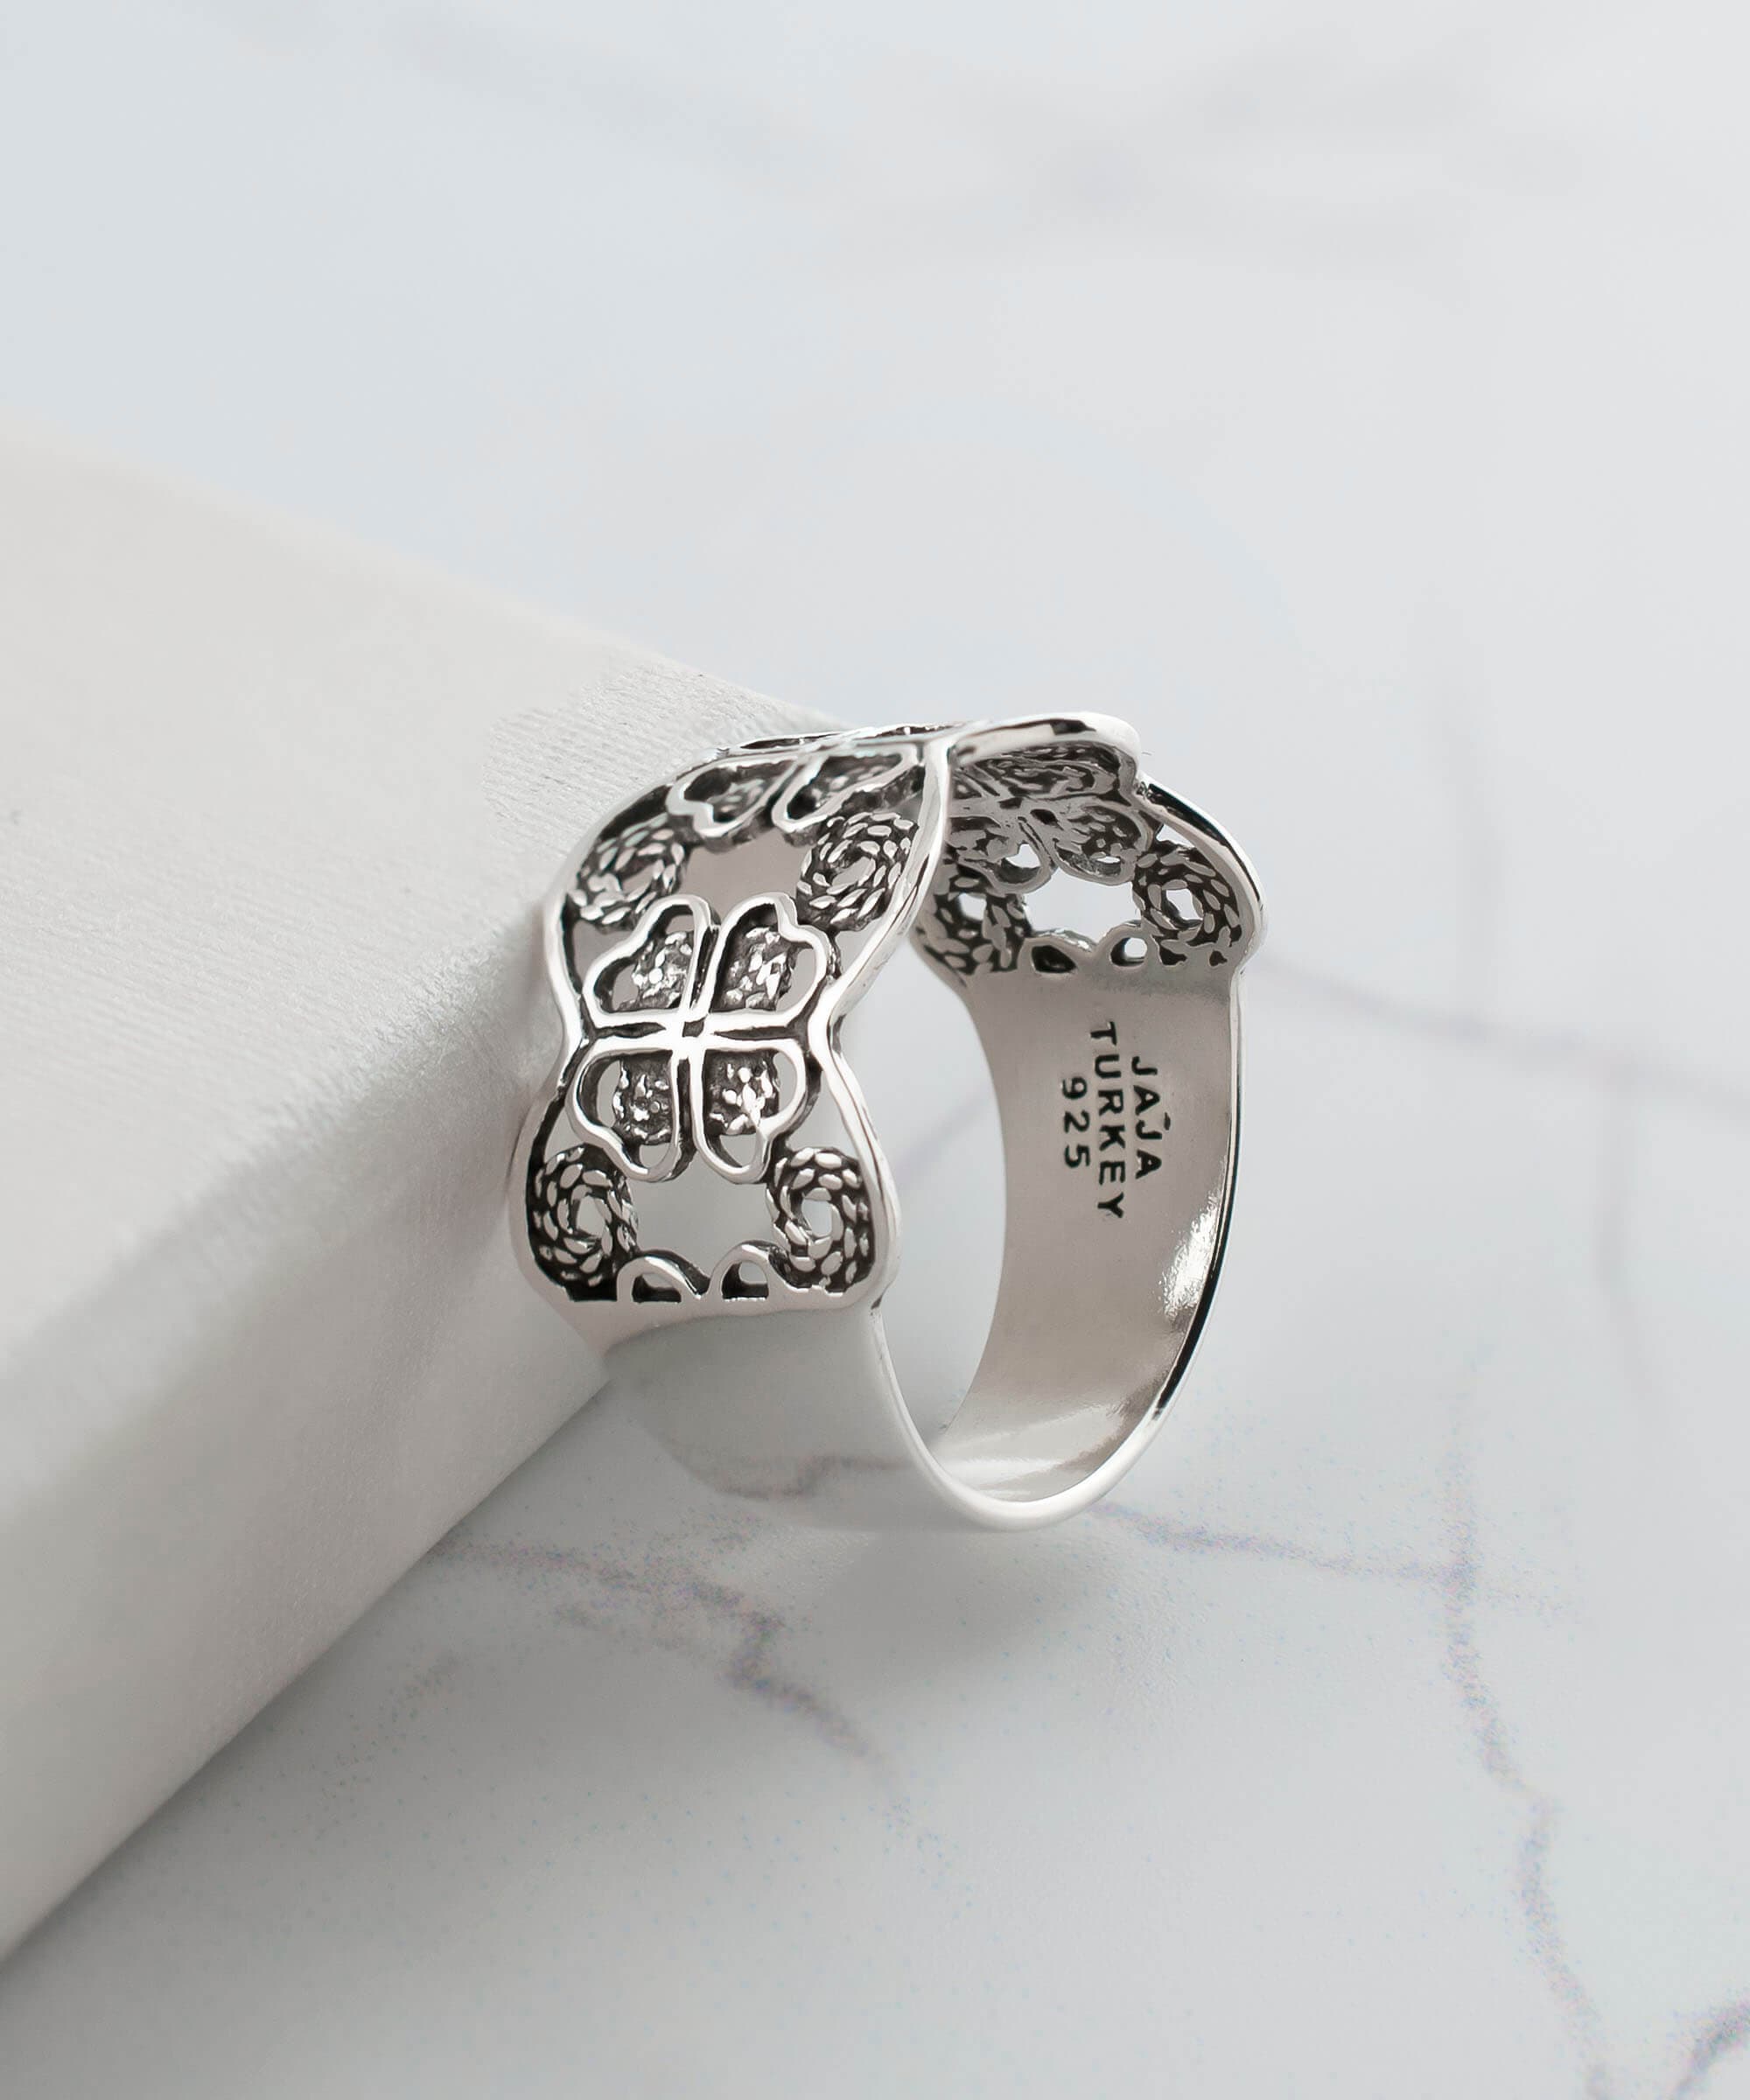 Silver Filigree Art Band Ring - 925 Sterling Silver, 0.39 Width, Mesopotamian-Inspired Design" - Jewelry & Watches - Bijou Her -  -  - 